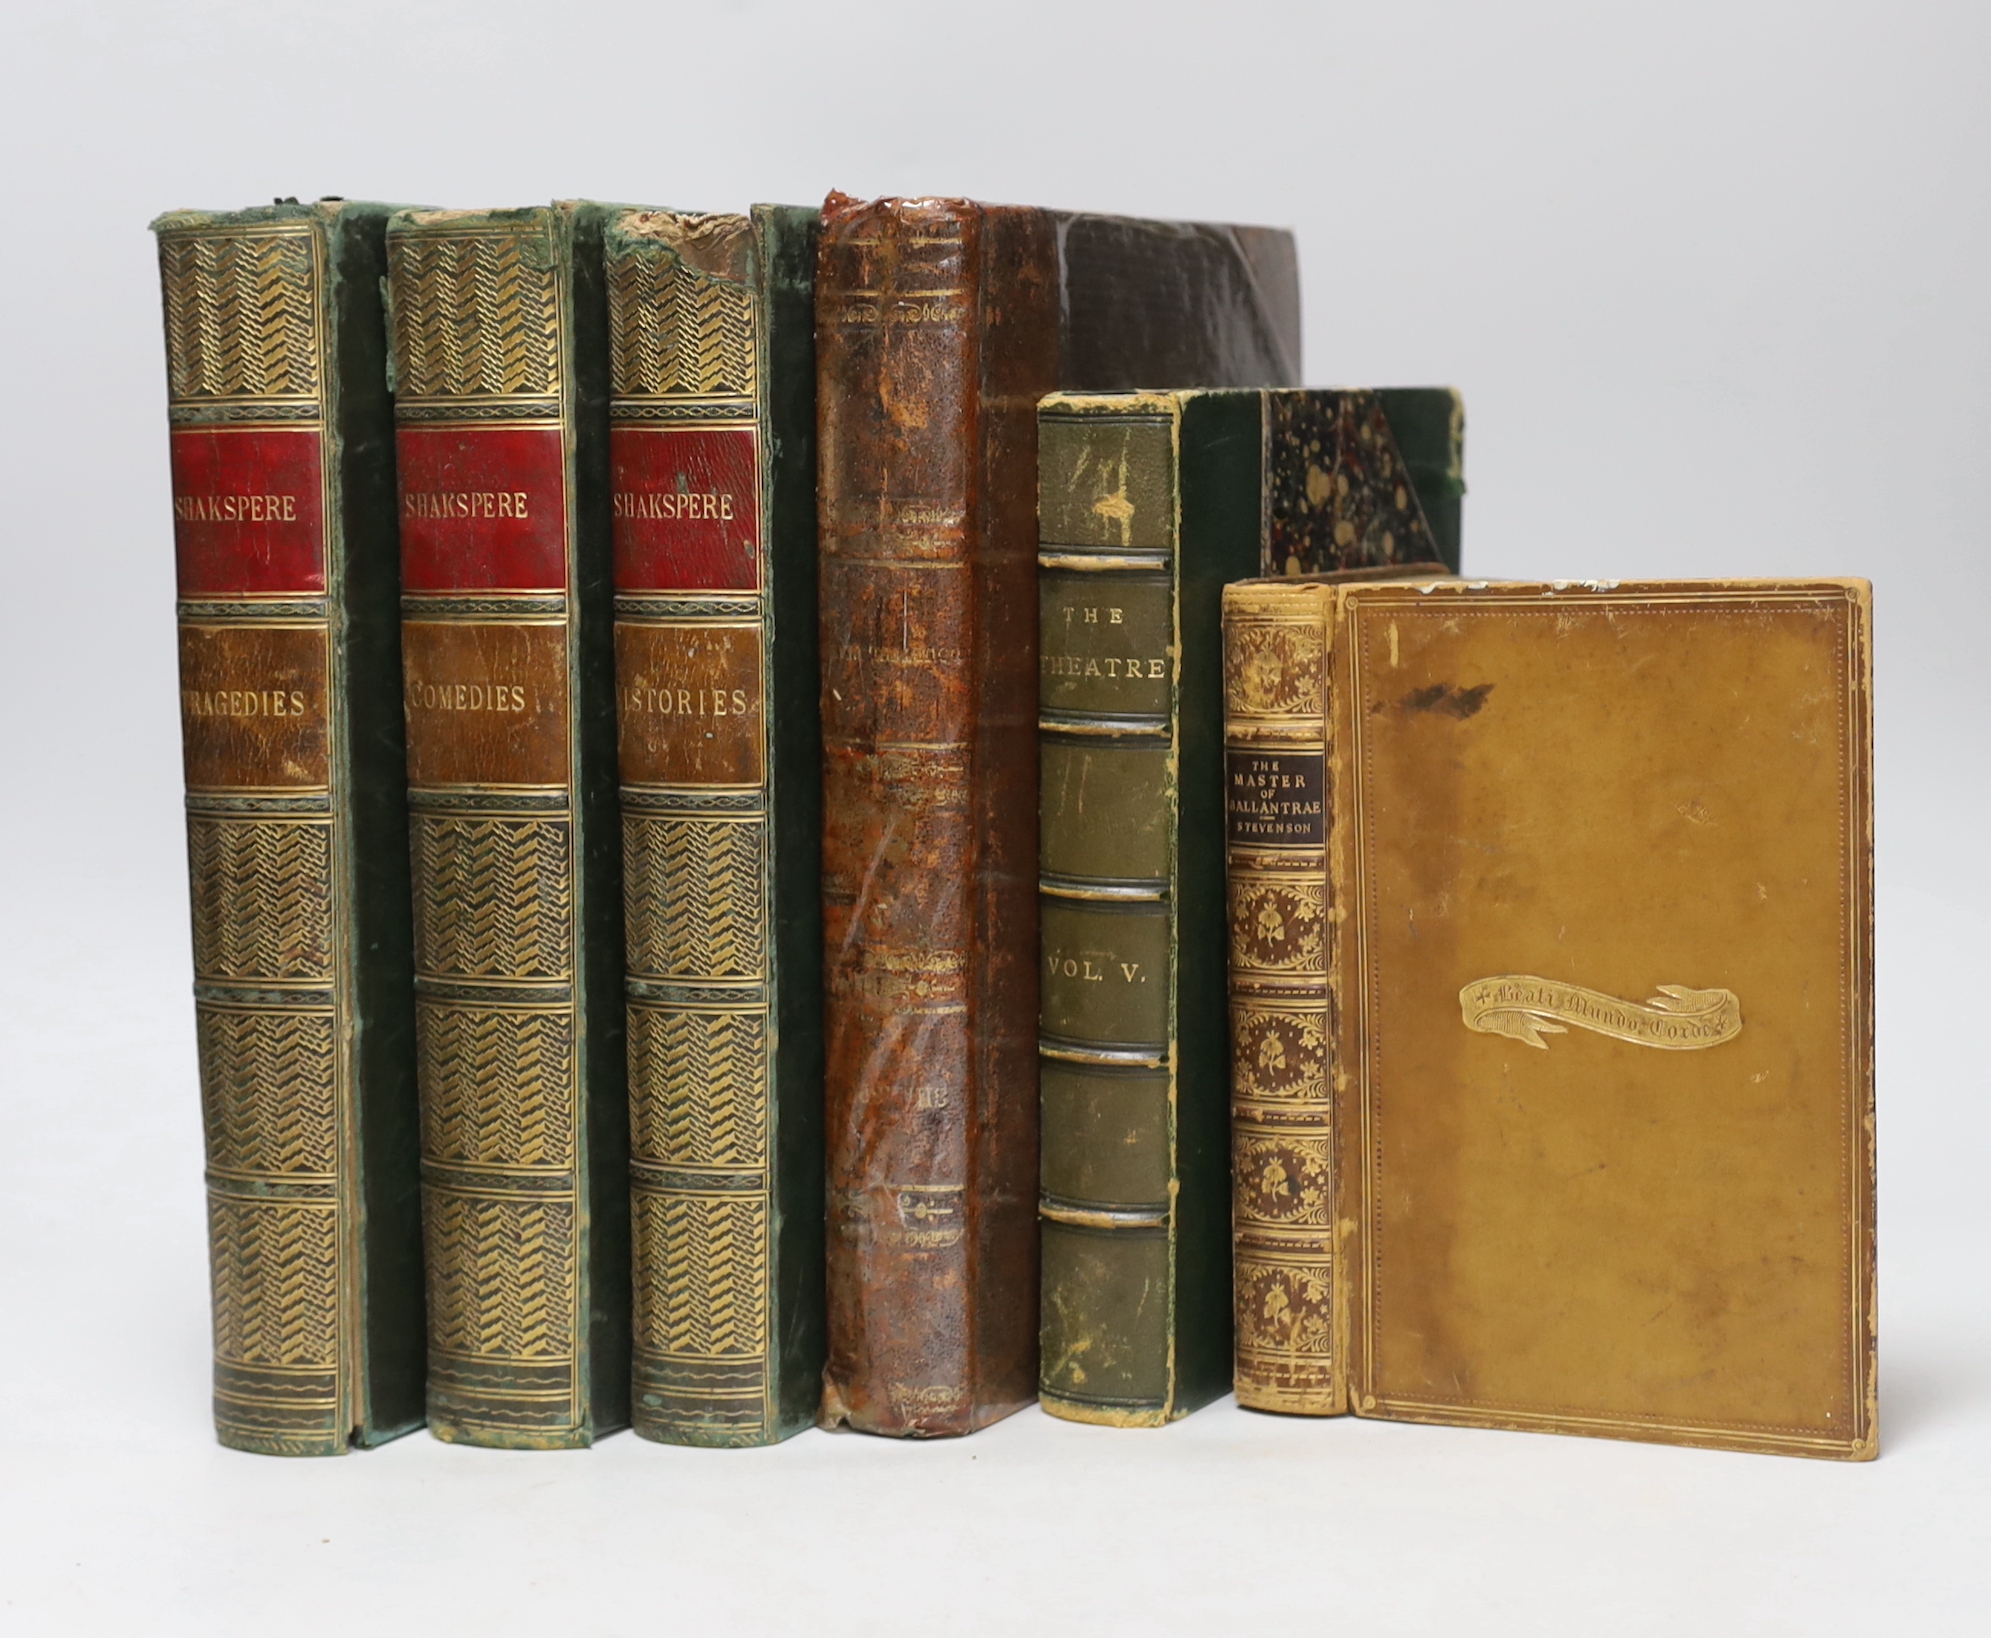 Three vols, Shakespeare and three other books (6)                                                                                                                                                                           